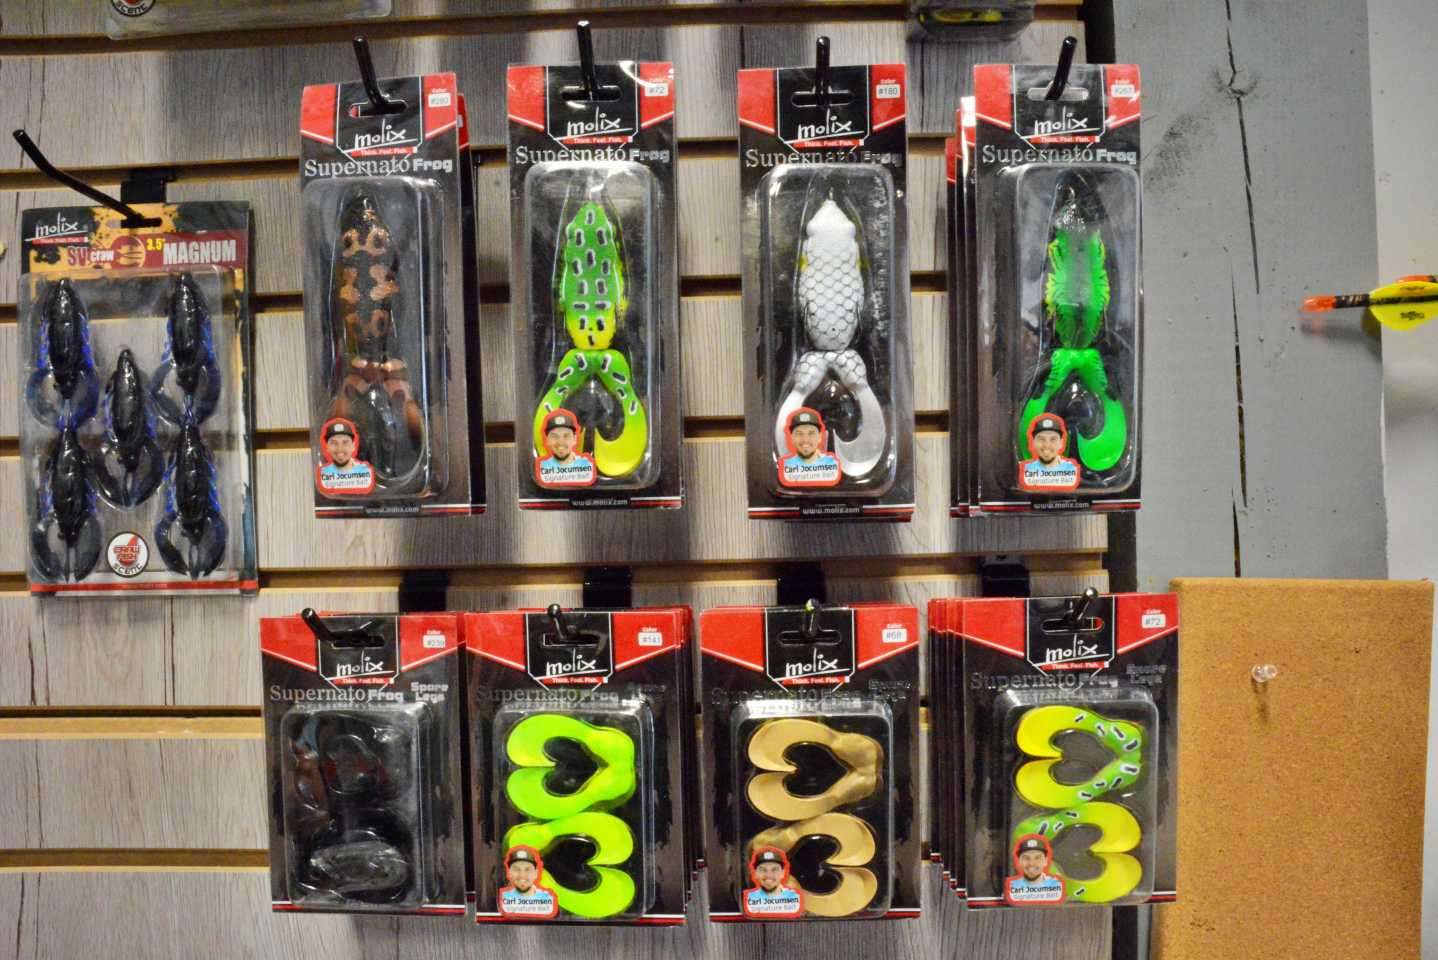 The man cave walls are lined with Carlâs top baits, including an assortment of the Molix Supernato Frog that he designed. âit combines the buoyancy and hydrodynamics of a traditional hollow body frog with a revolutionary tail design.â The high-density plastic tail has two inward facing appendages that create a hard, propeller-like sputter across the surface.